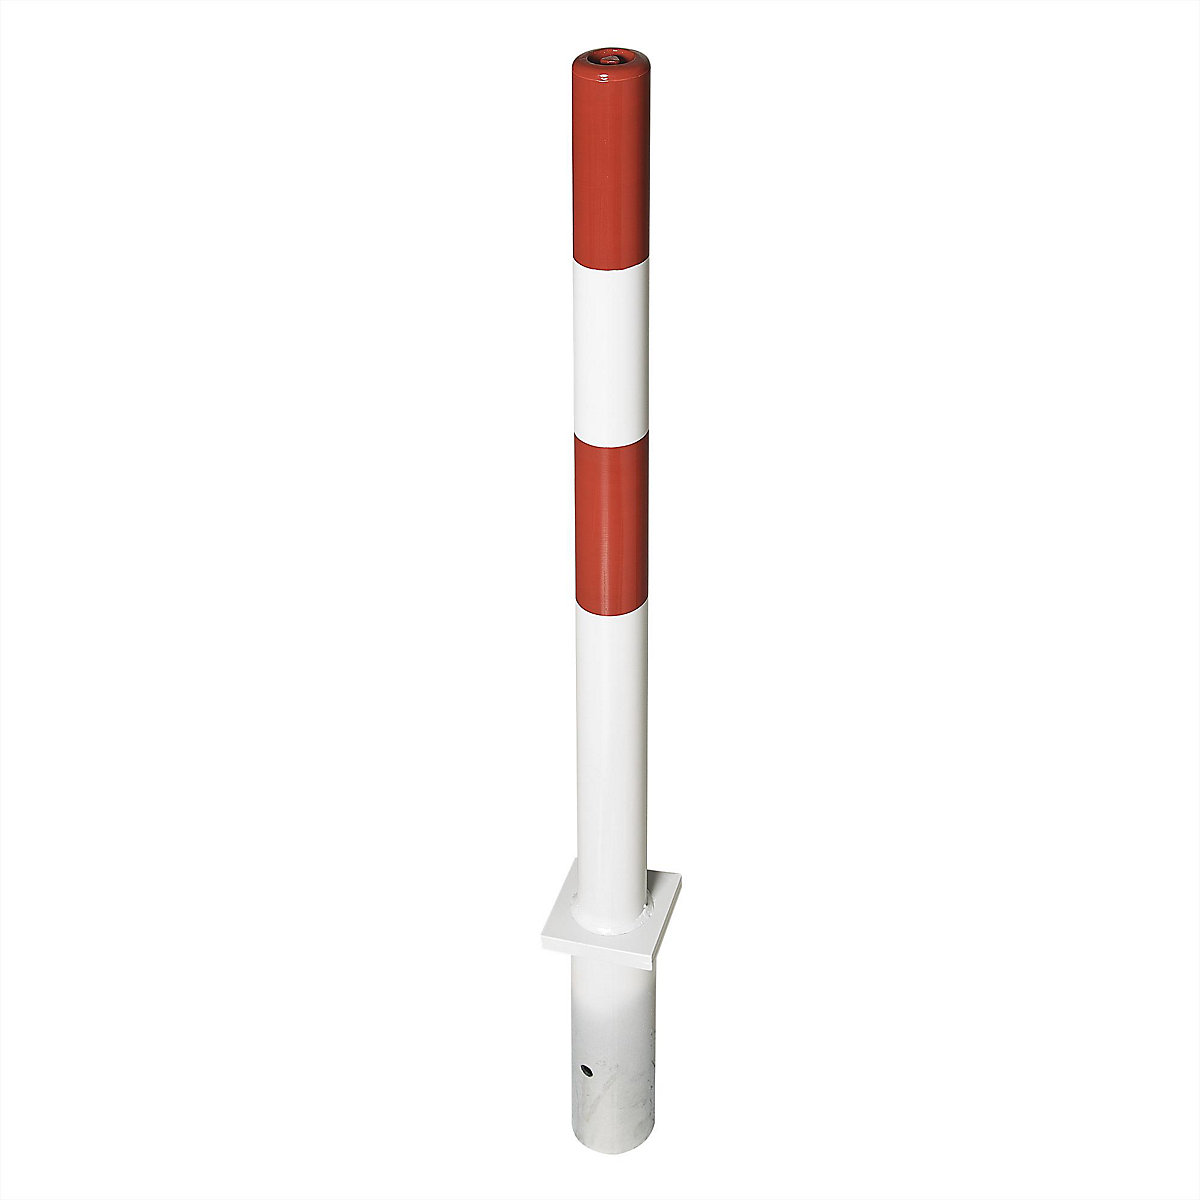 Barrier post made of steel, for setting in concrete, Ø 76 mm, red/white, 1 chain eyelet-6